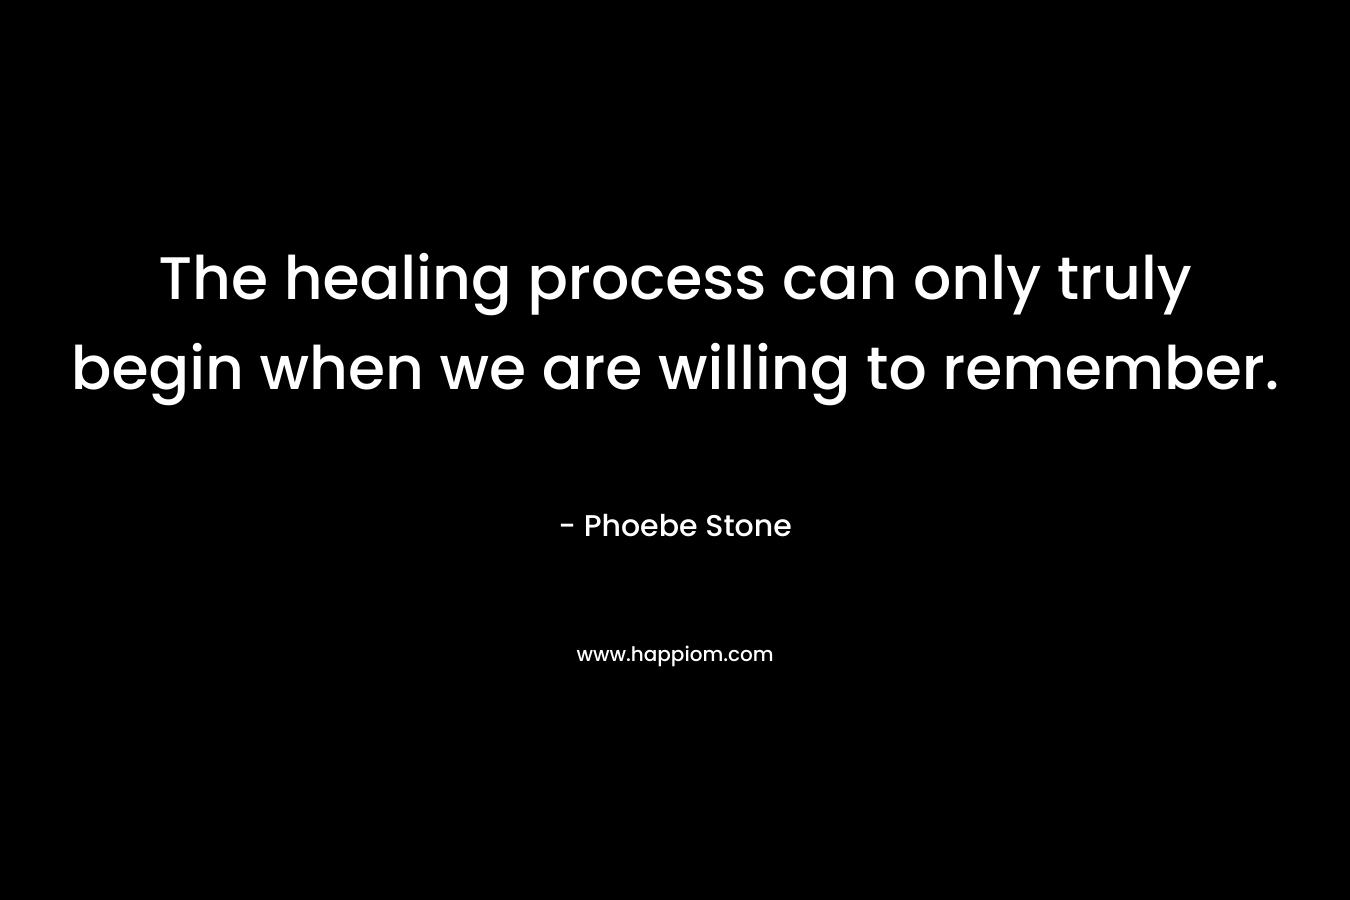 The healing process can only truly begin when we are willing to remember. – Phoebe Stone